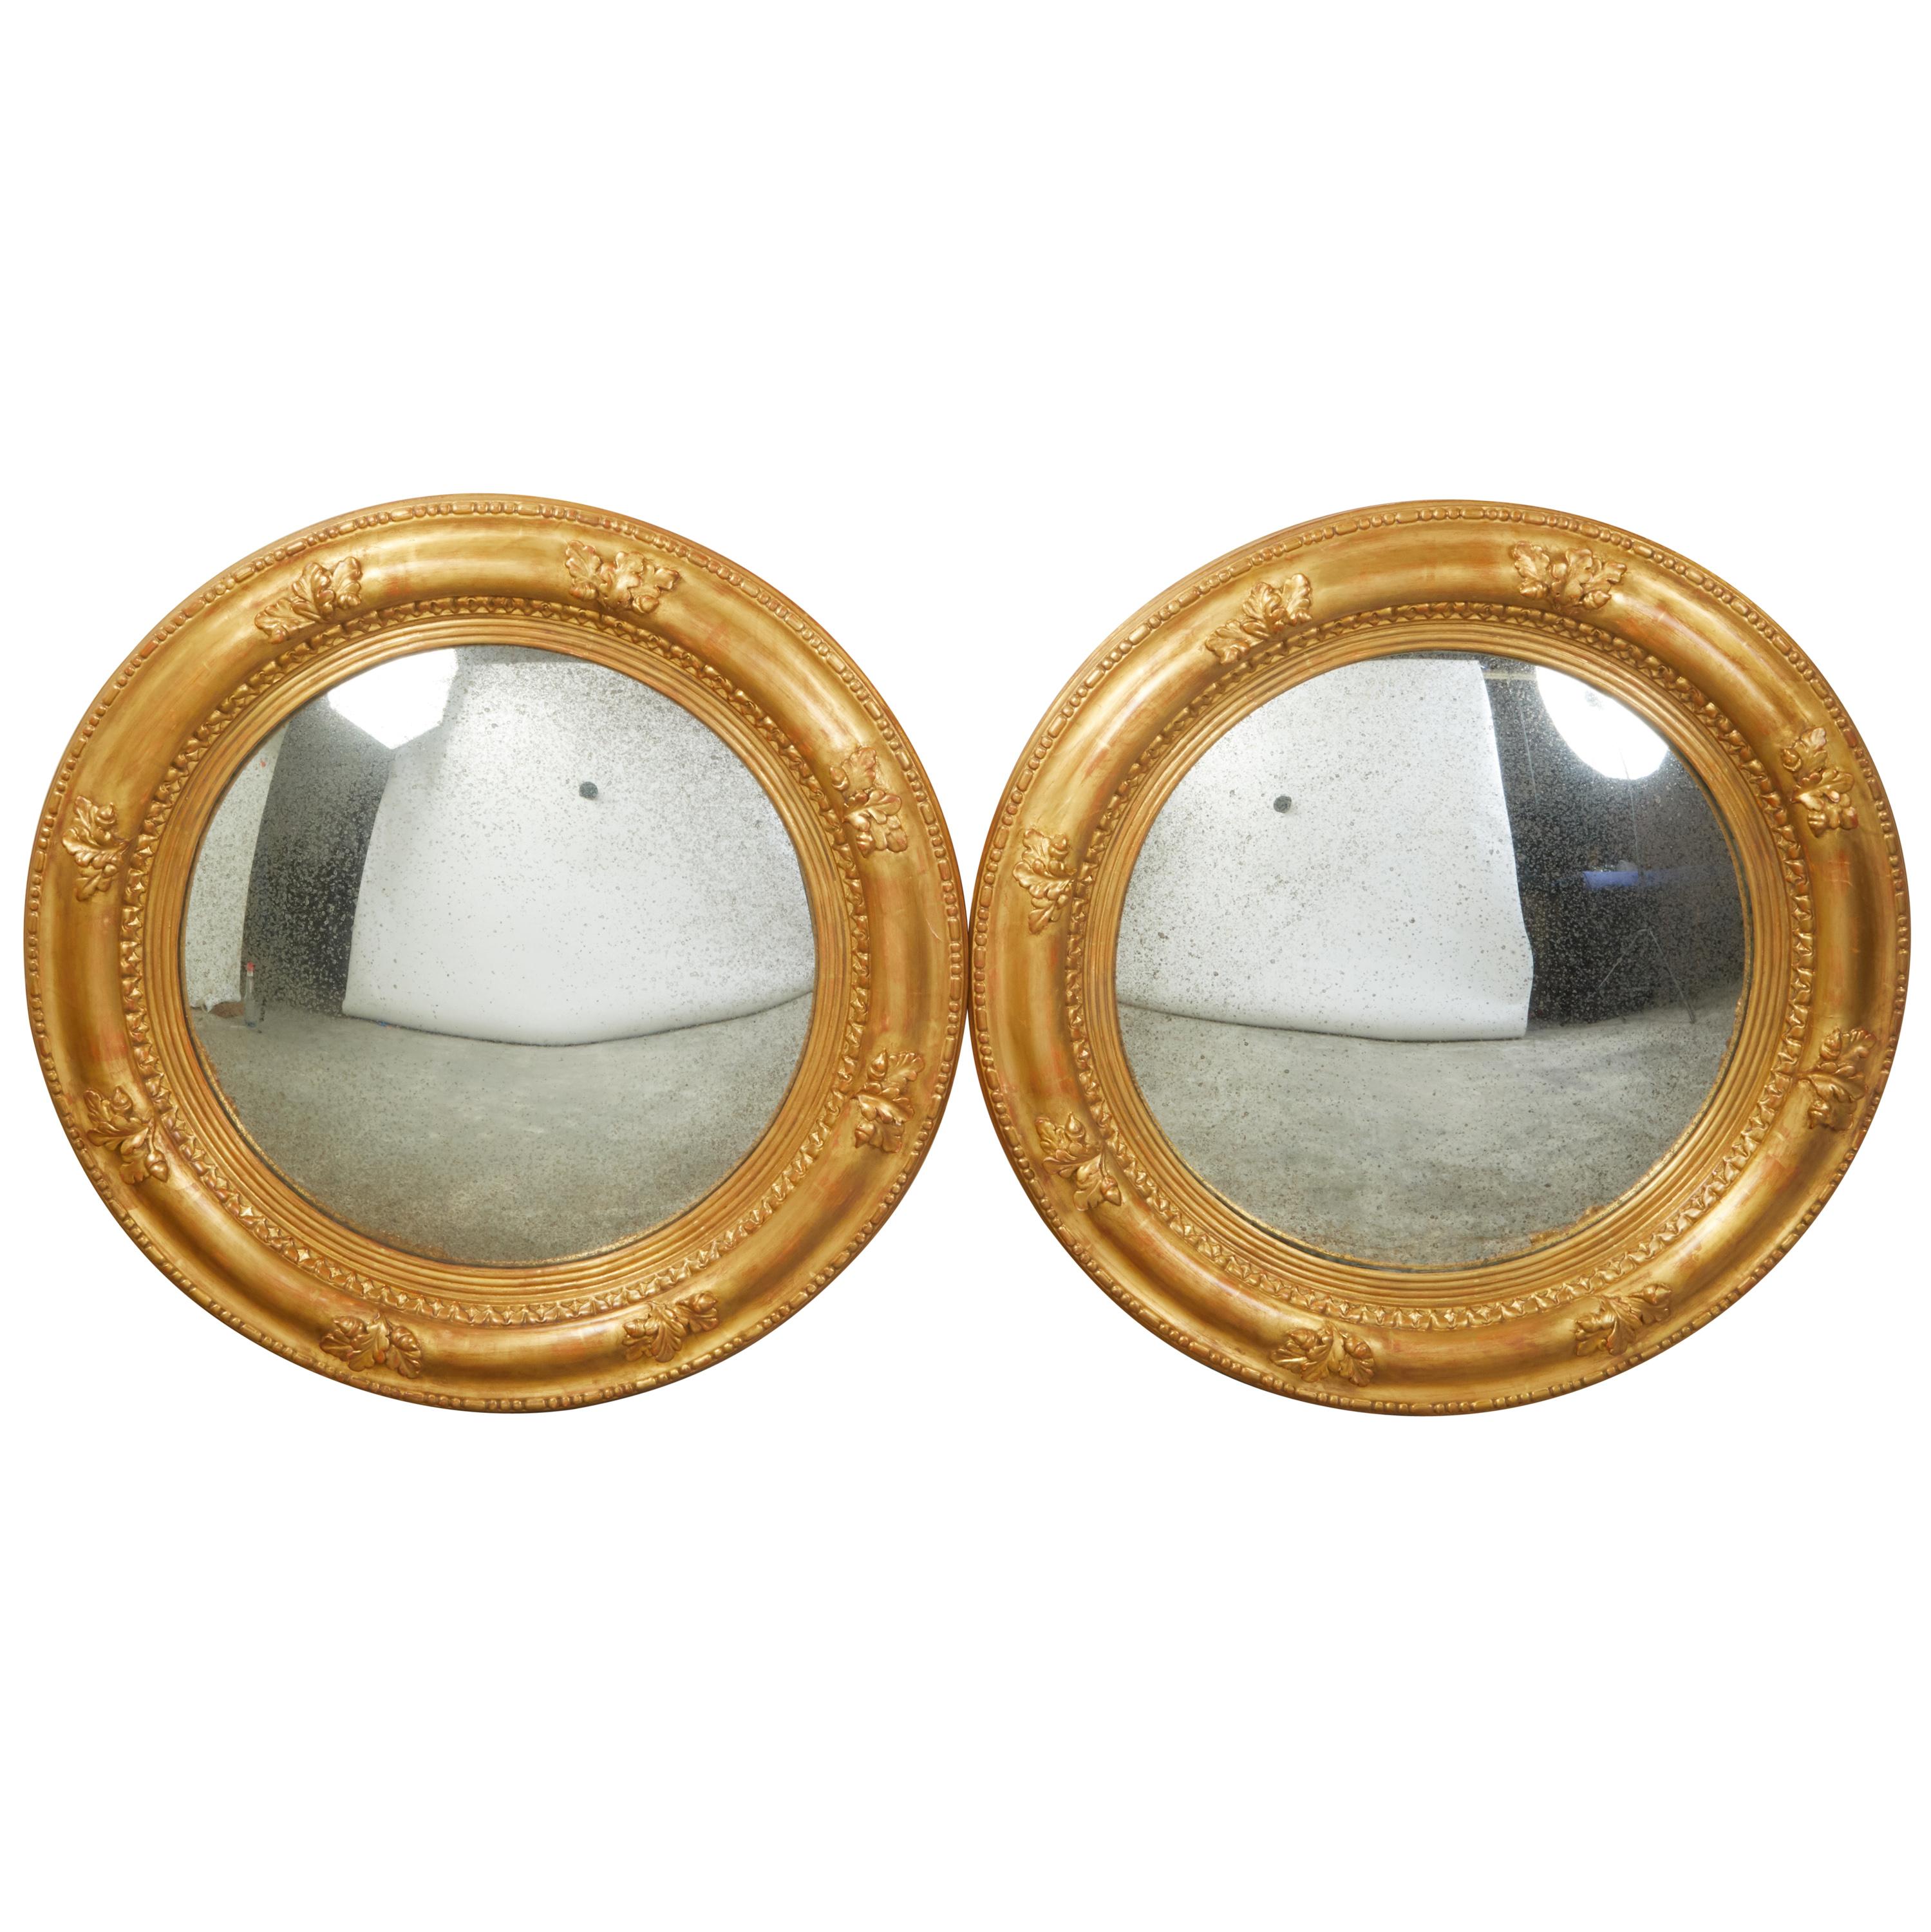 Pair of English Giltwood 1940s Round Convex Mirrors with Carved Oak Leaves In Good Condition For Sale In Atlanta, GA